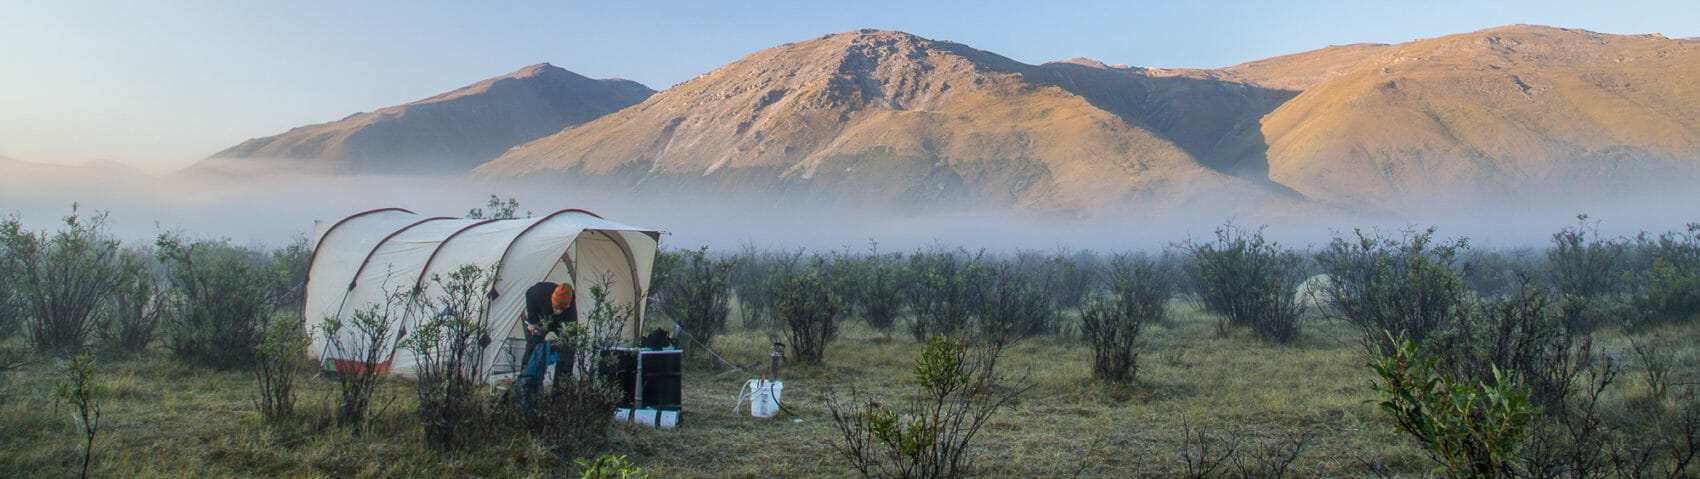 A camp in the Noatak Valley, Gates of the Arctic National Park, AK USA.